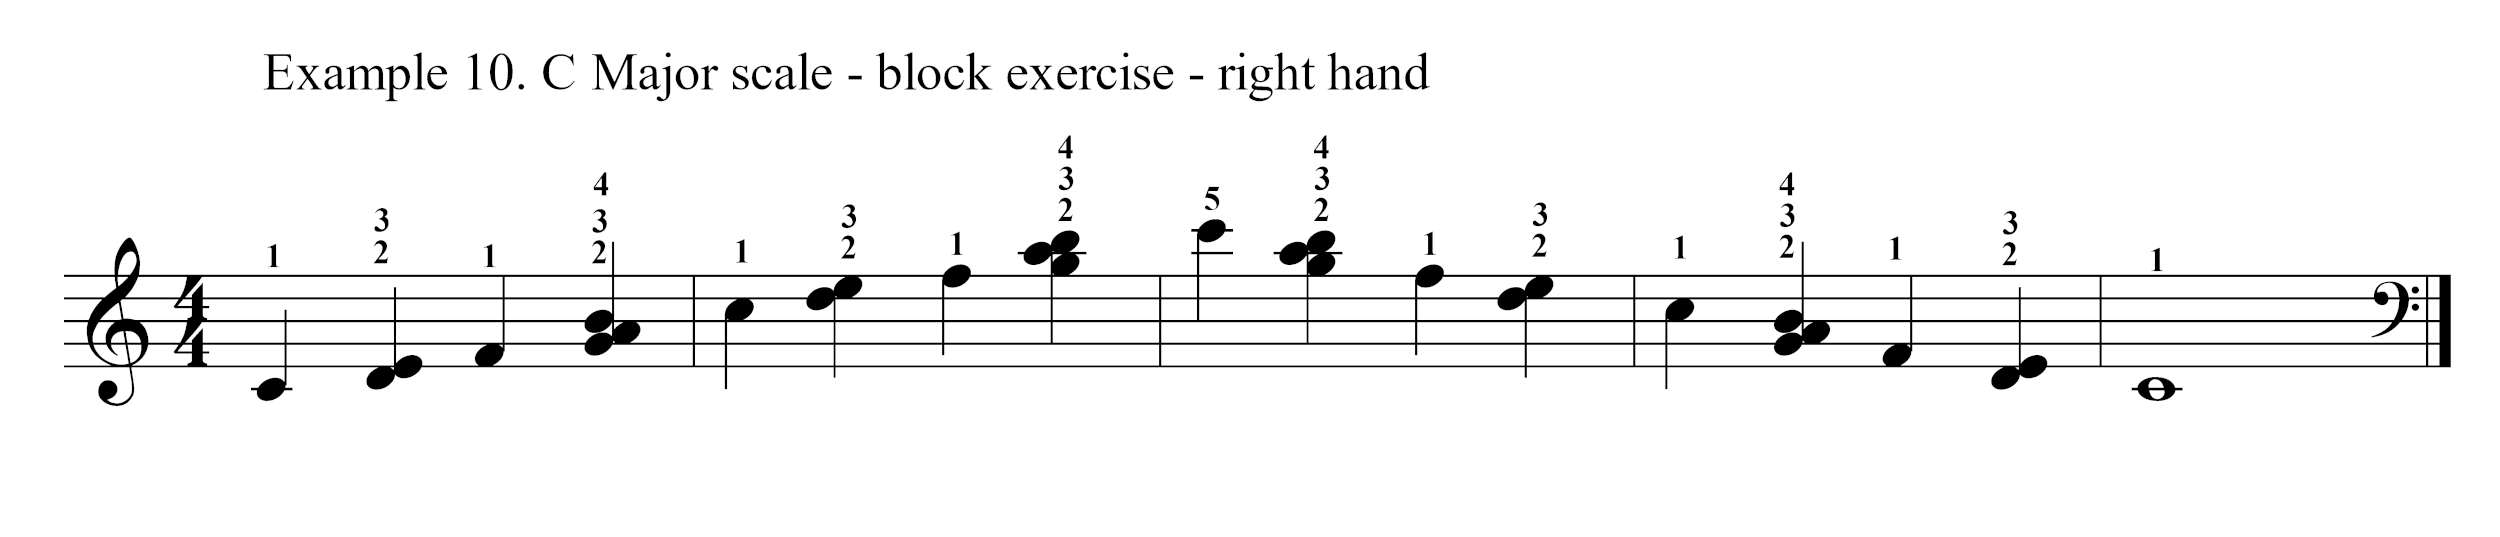 Block positions exercise right hand piano scale